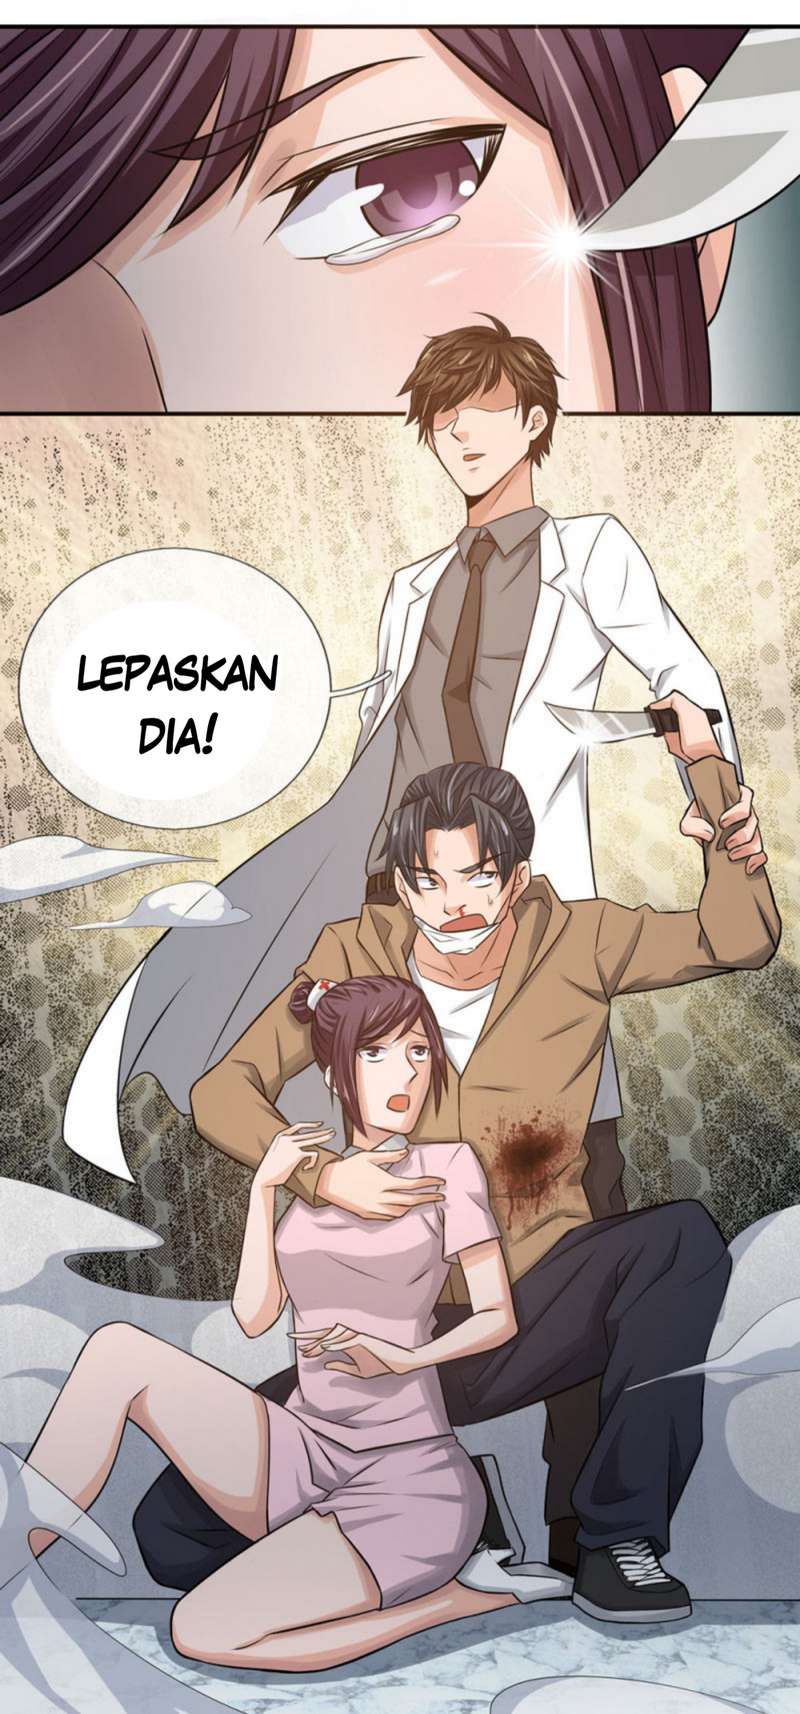 Super Medical Fairy in The City Chapter 8